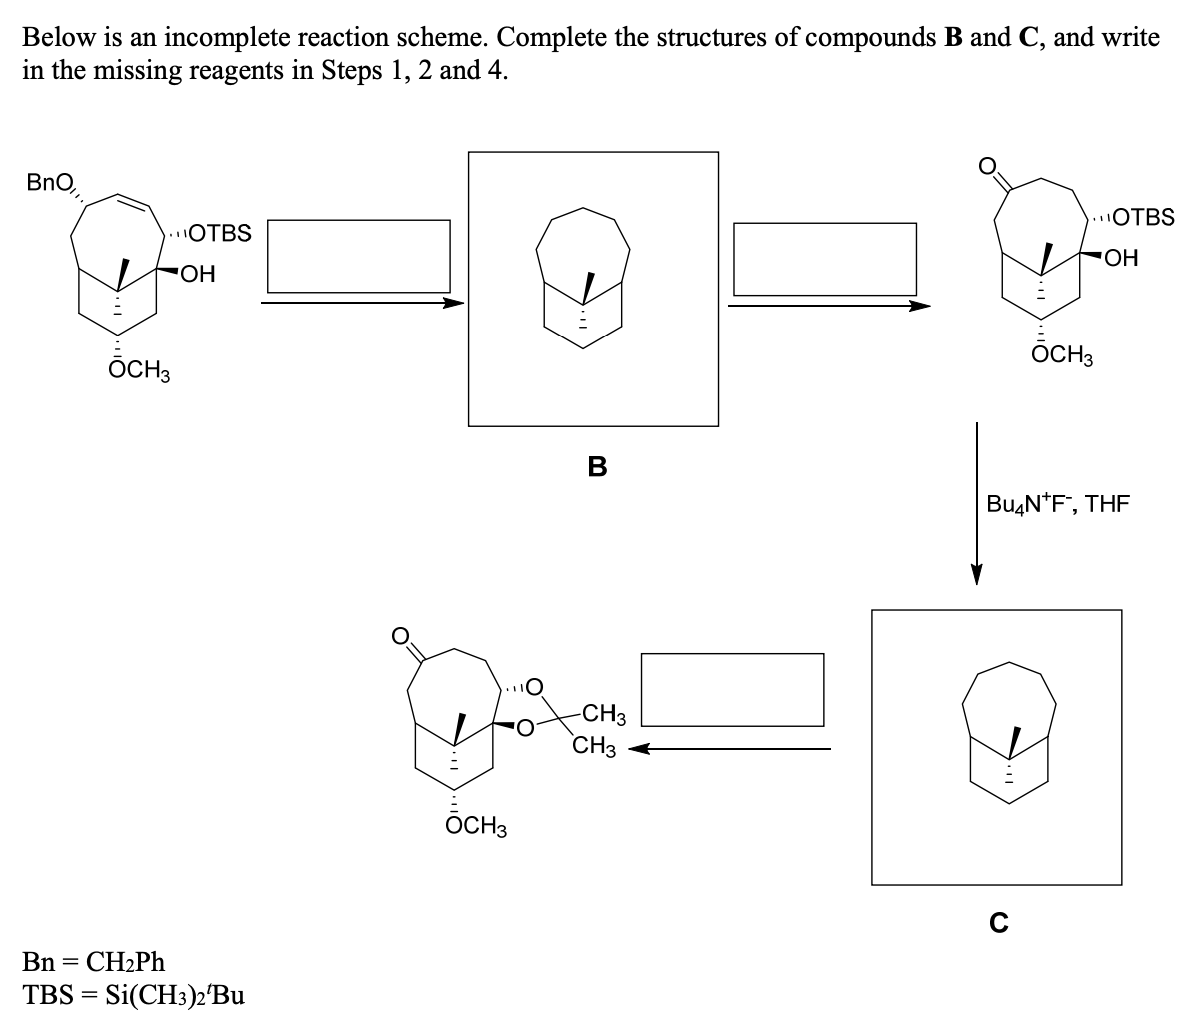 Below is an incomplete reaction scheme. Complete the structures of compounds B and C, and write
in the missing reagents in Steps 1, 2 and 4.
BnO,
.OTBS
.OTBS
ОН
ÕCH3
ÕCH3
B
BuşN*F", THF
CH3
CH3
ÕCH3
Bn = CH2PH
TBS = Si(CH3)2°BU
